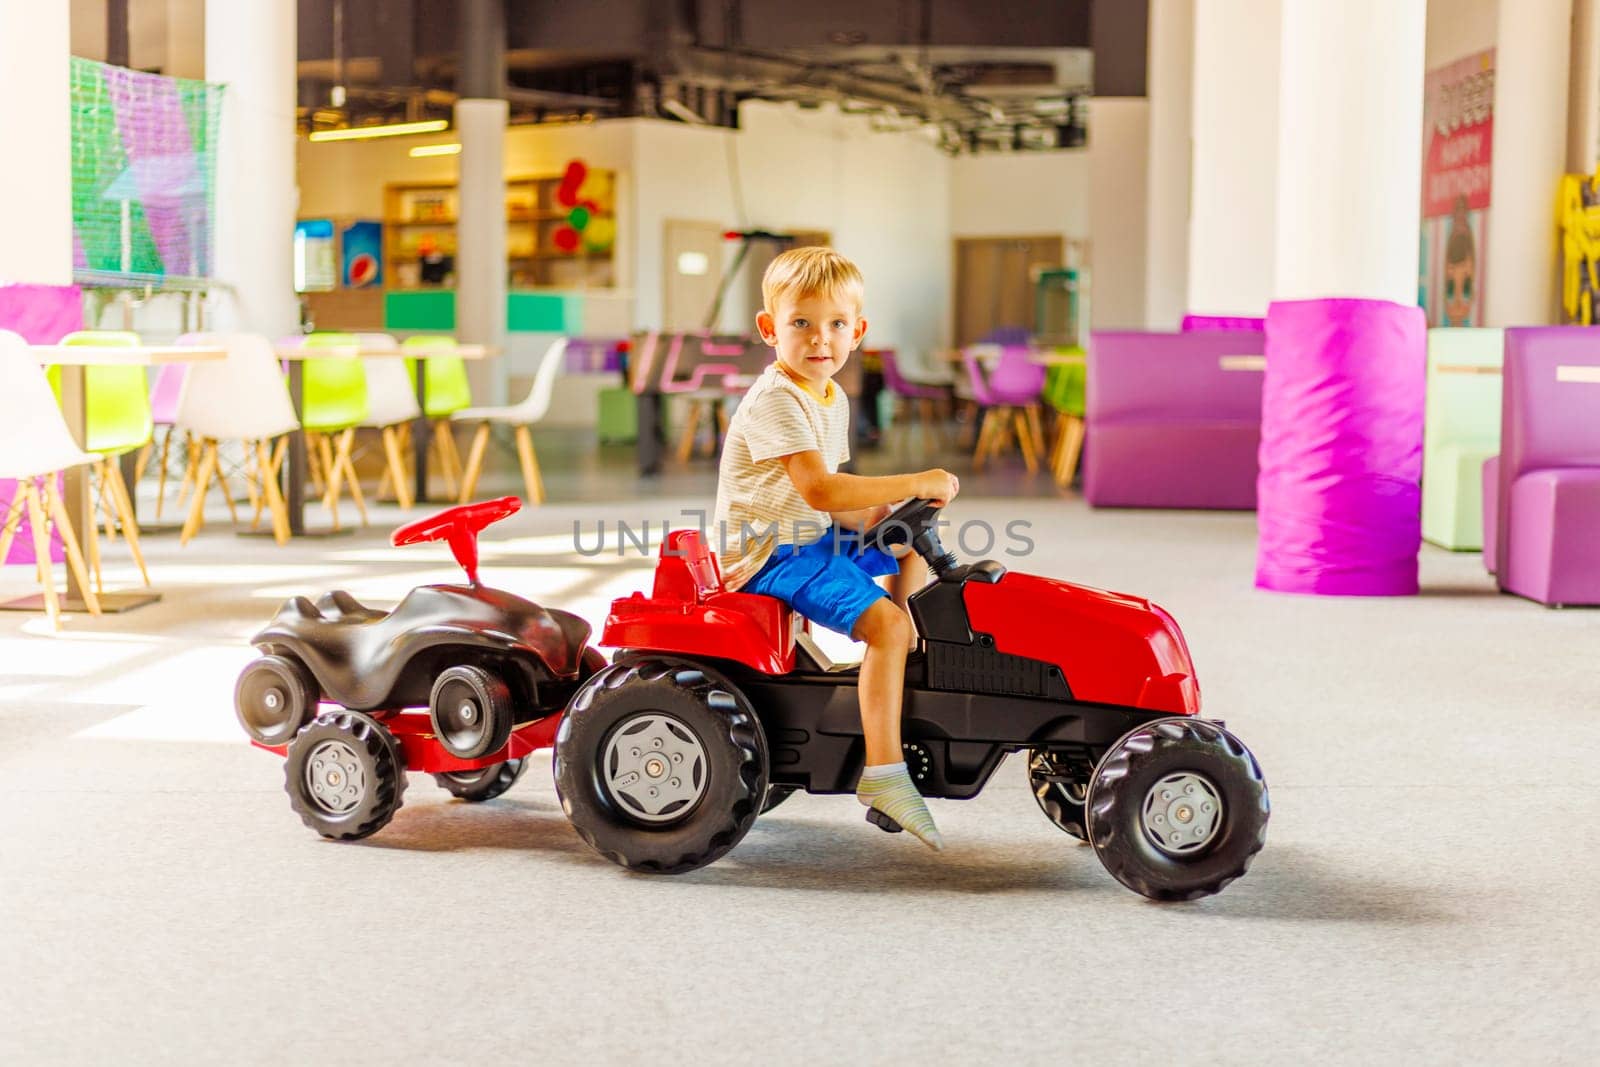 A child rides a toy pedal car at a children's play center by andreyz